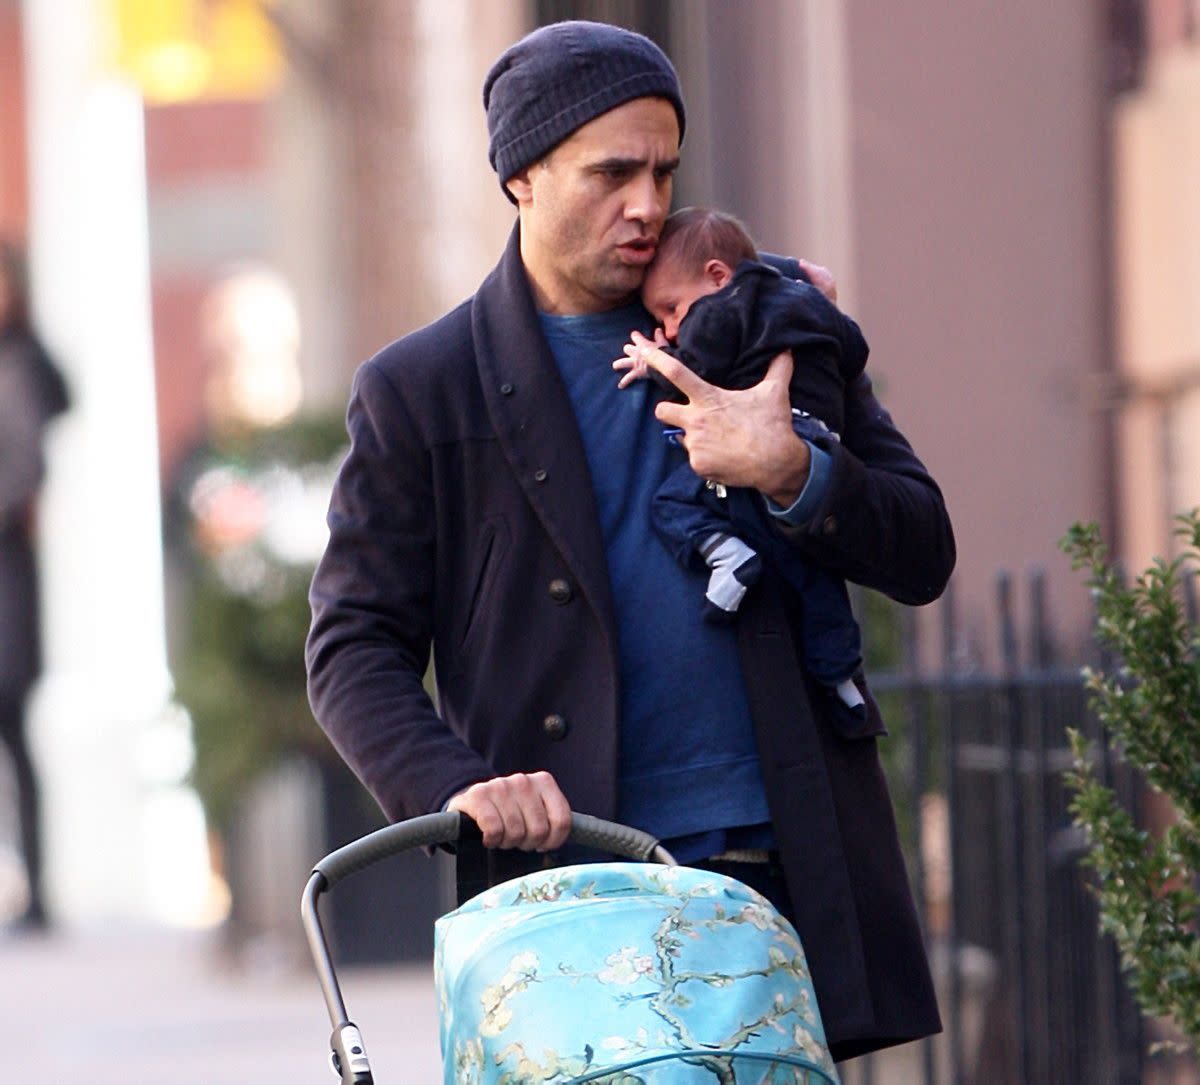 What a precious bundle of joy! Actor Bobby Cannavale showed off his newborn son Rocco for the first time as he stepped out for a stroll in New York City on Feb. 28, 2016. Cannavale's partner, actress Rose Byrne, gave birth to Rocco a month ago on Feb. 1, 2016.